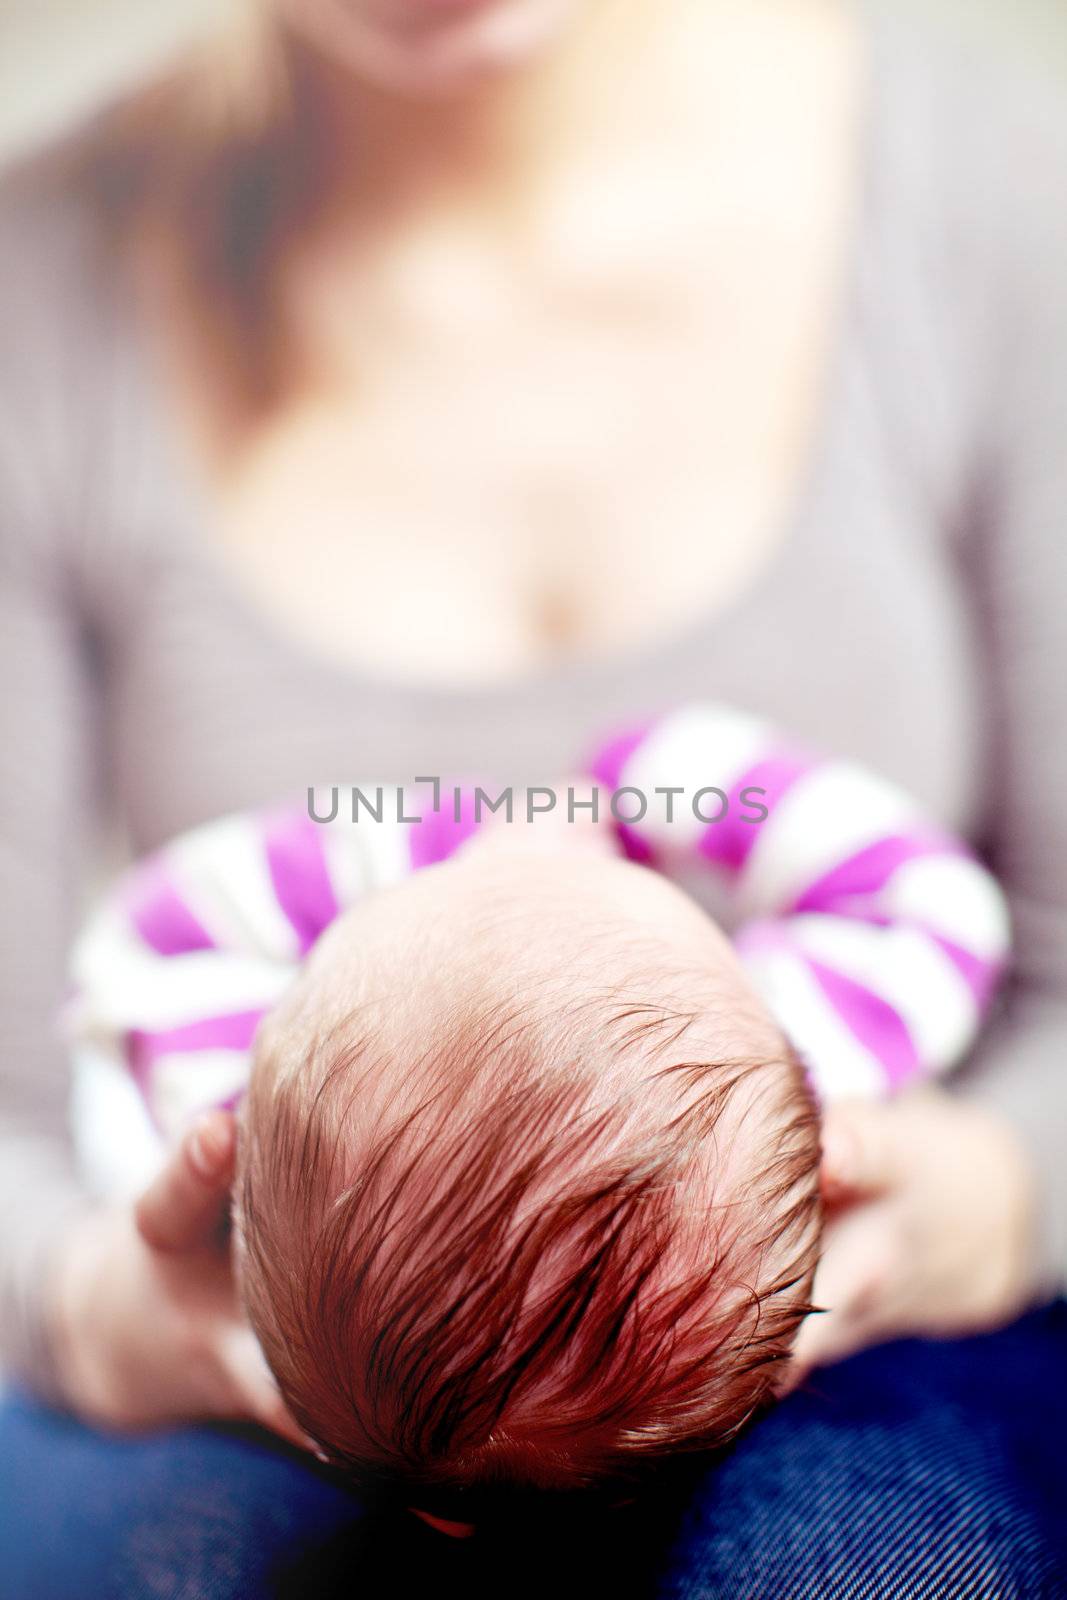 View from the top of the head of a young mother cradling her newborn baby in her hands as it rests on her lap